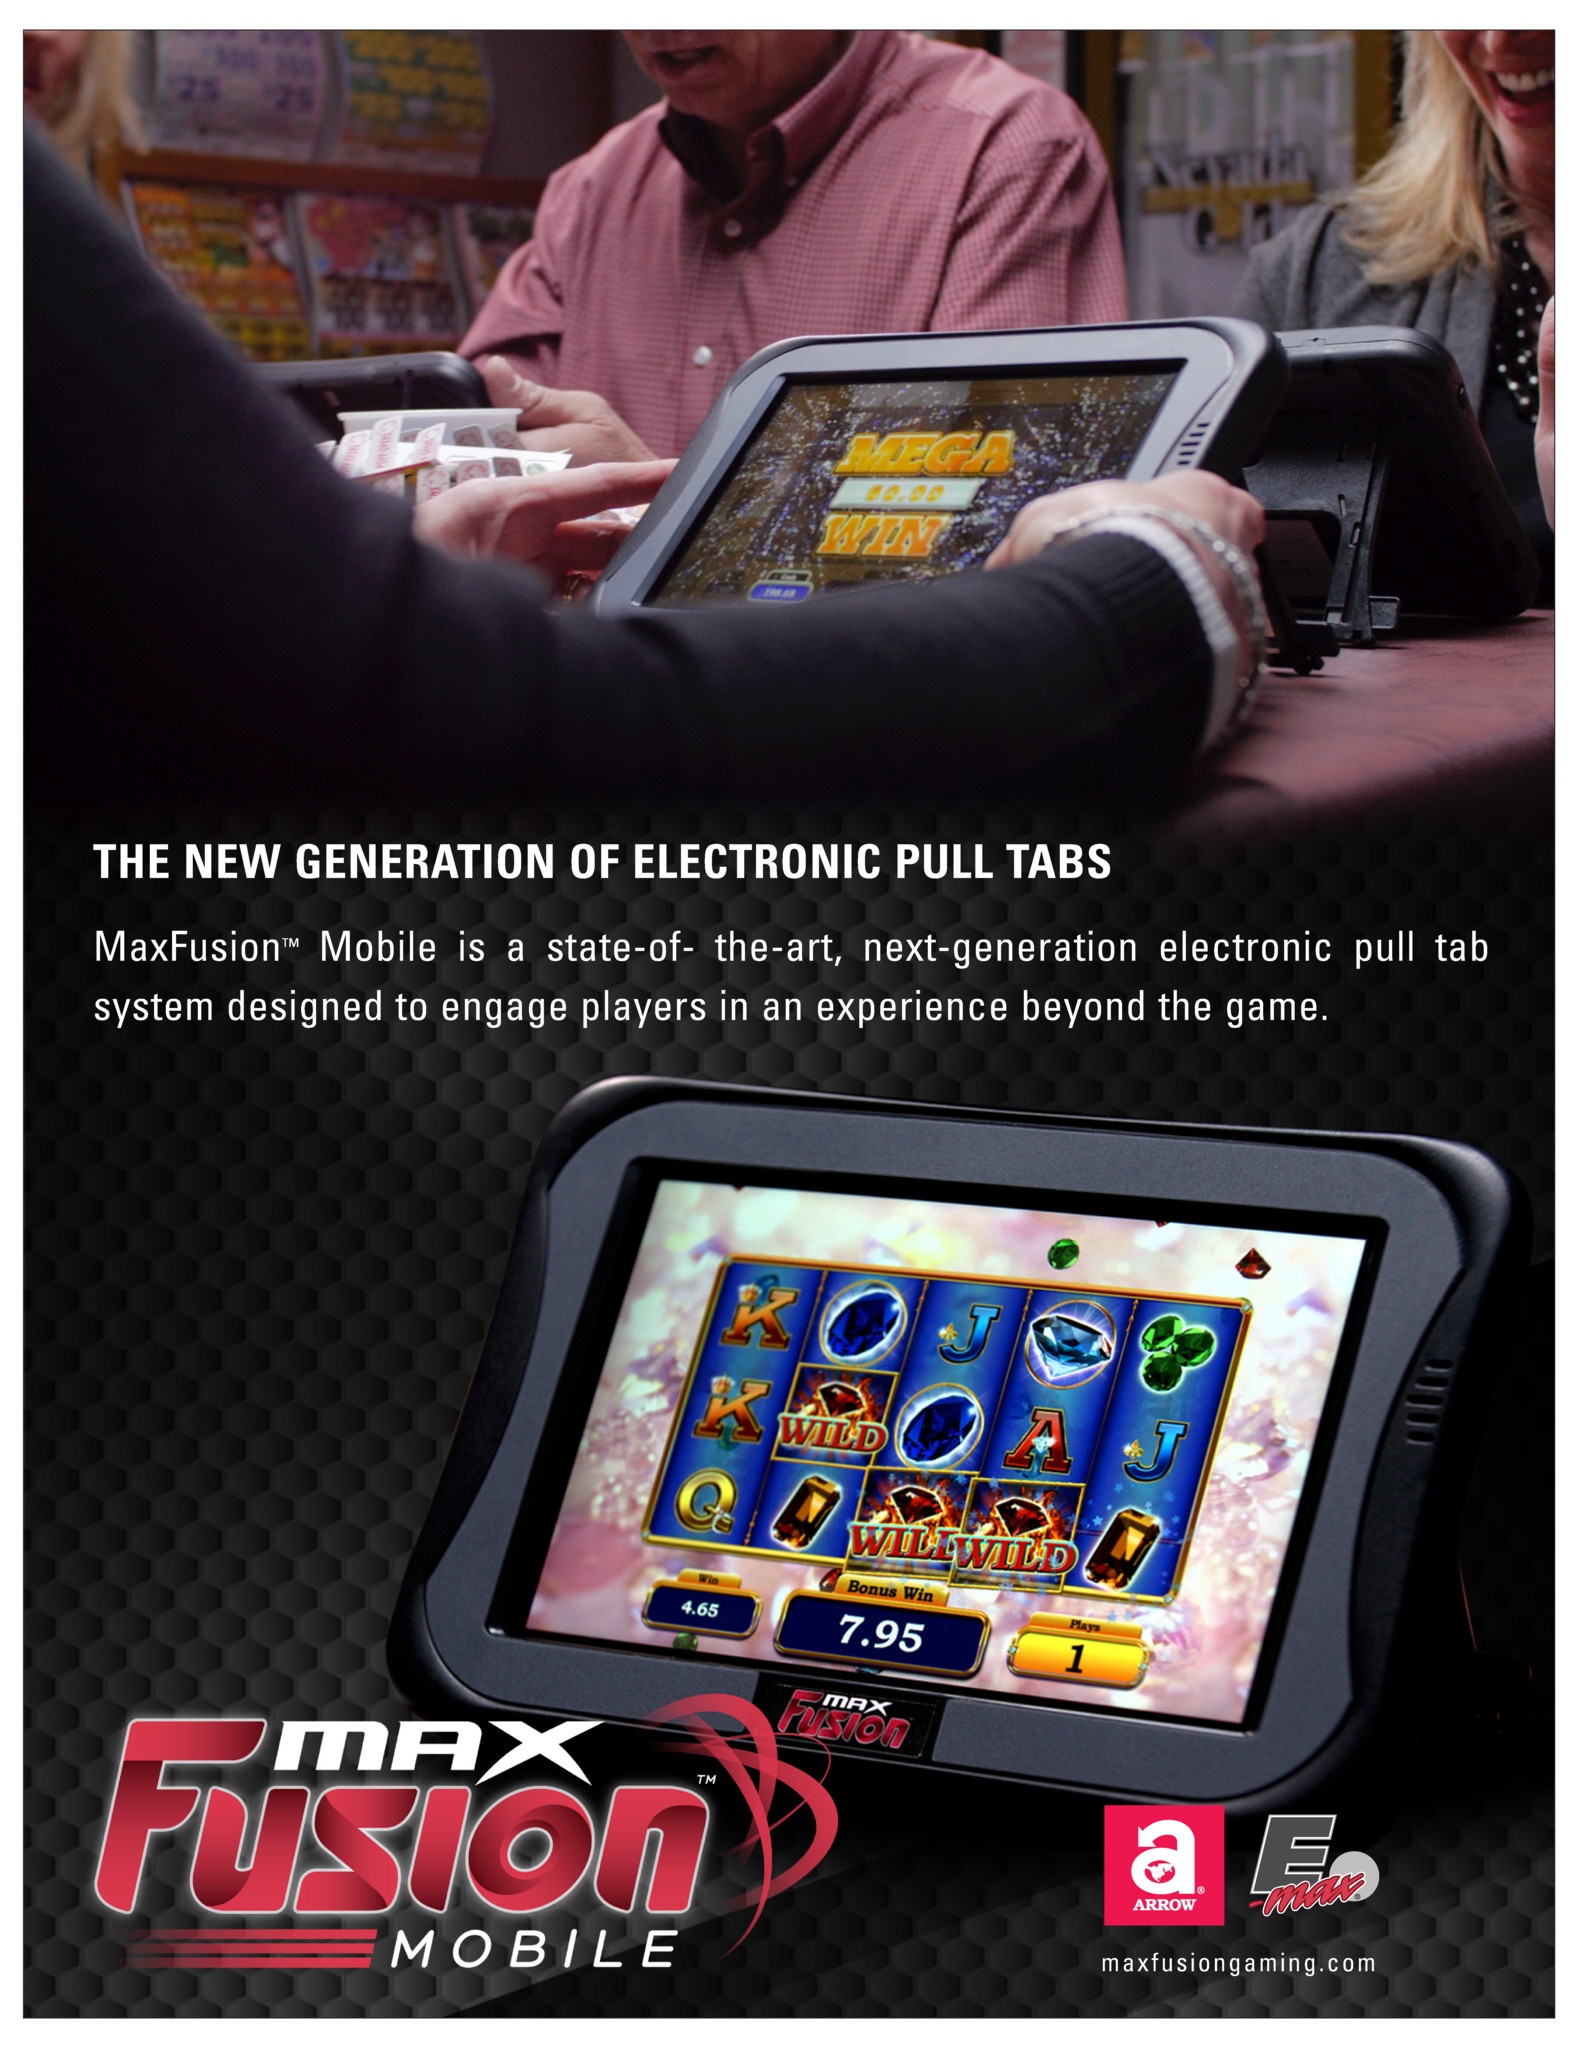 MaxFusion Mobile Flyer Promotional Materials/Equipment Flyers & Brochures